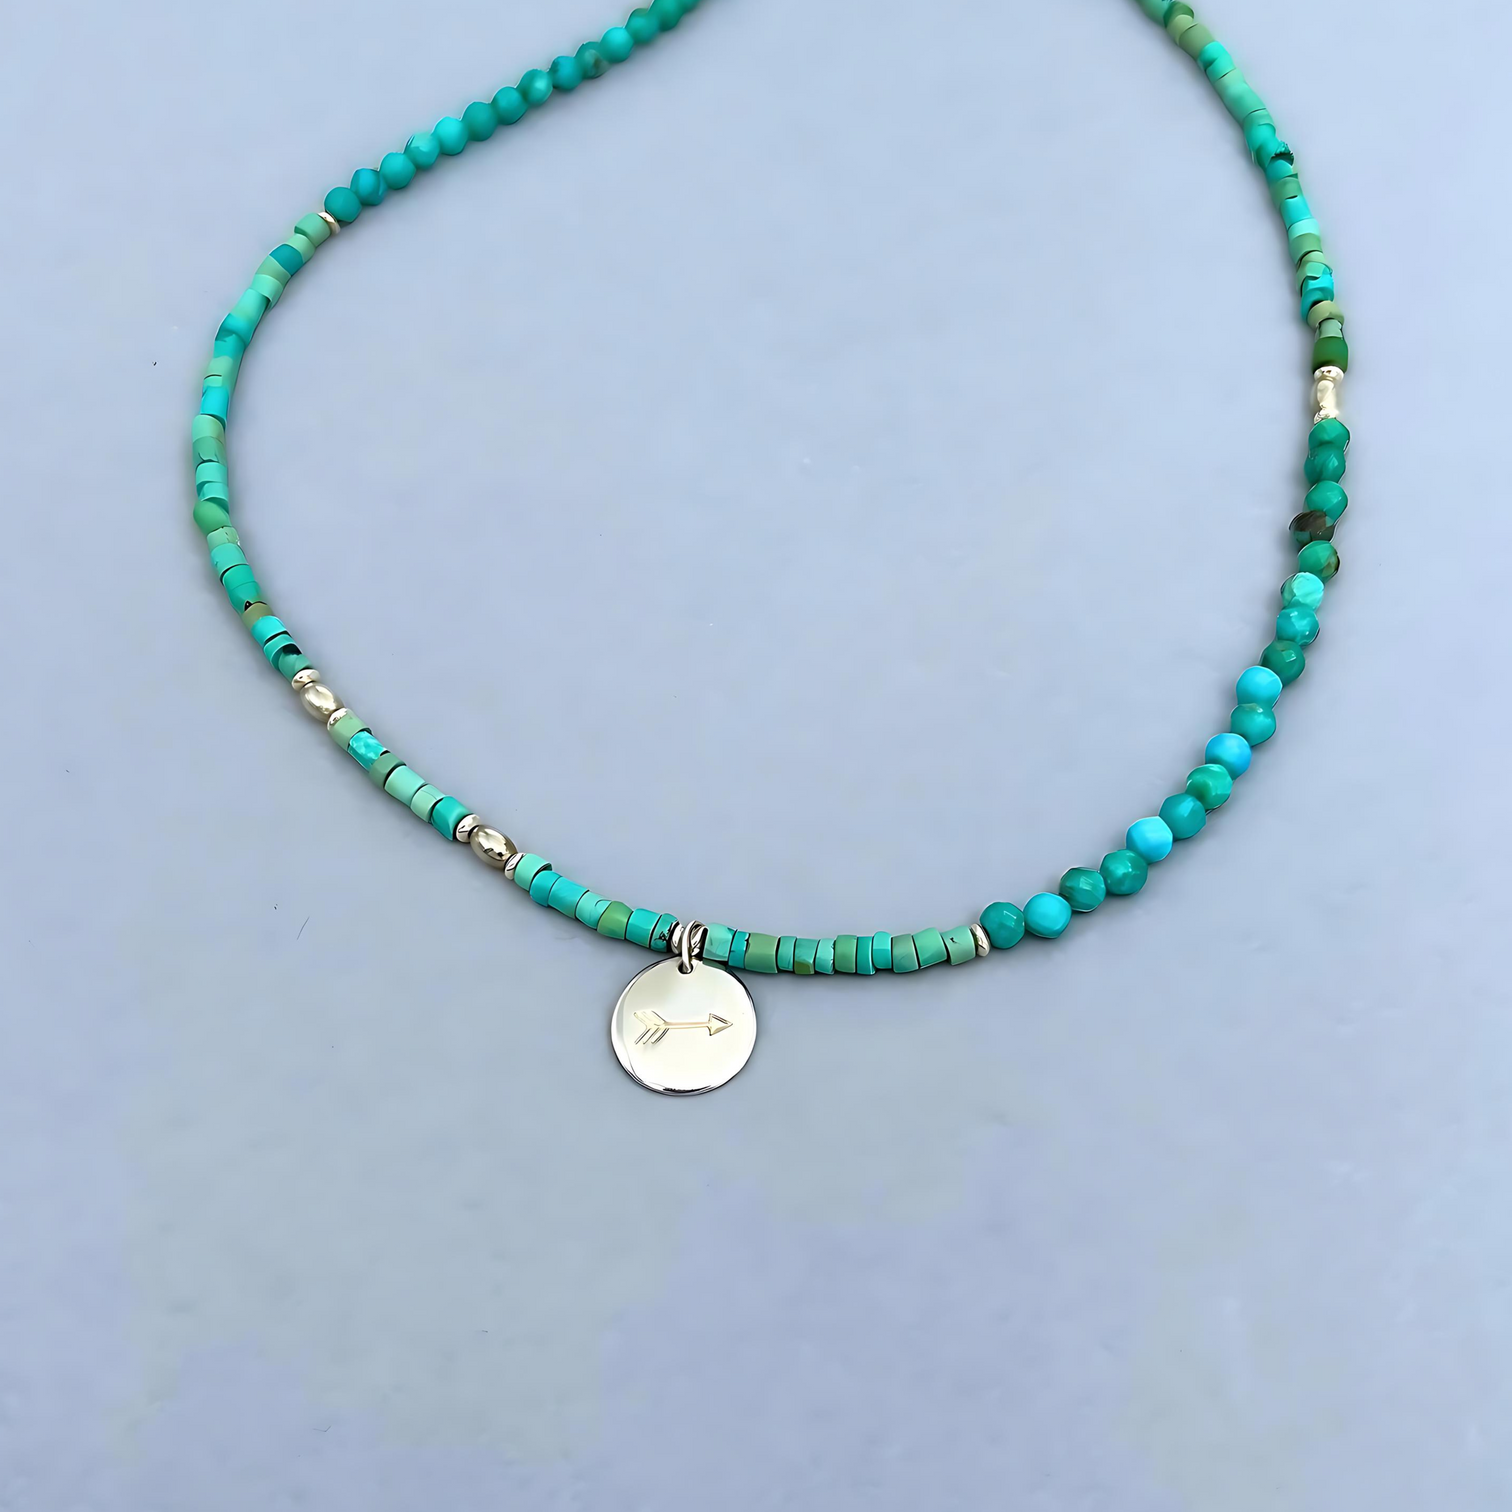 Free Spirit Necklace from Le BijouBIjou made with turquoise rondelles and a silver charm with an arrow. Detail shot